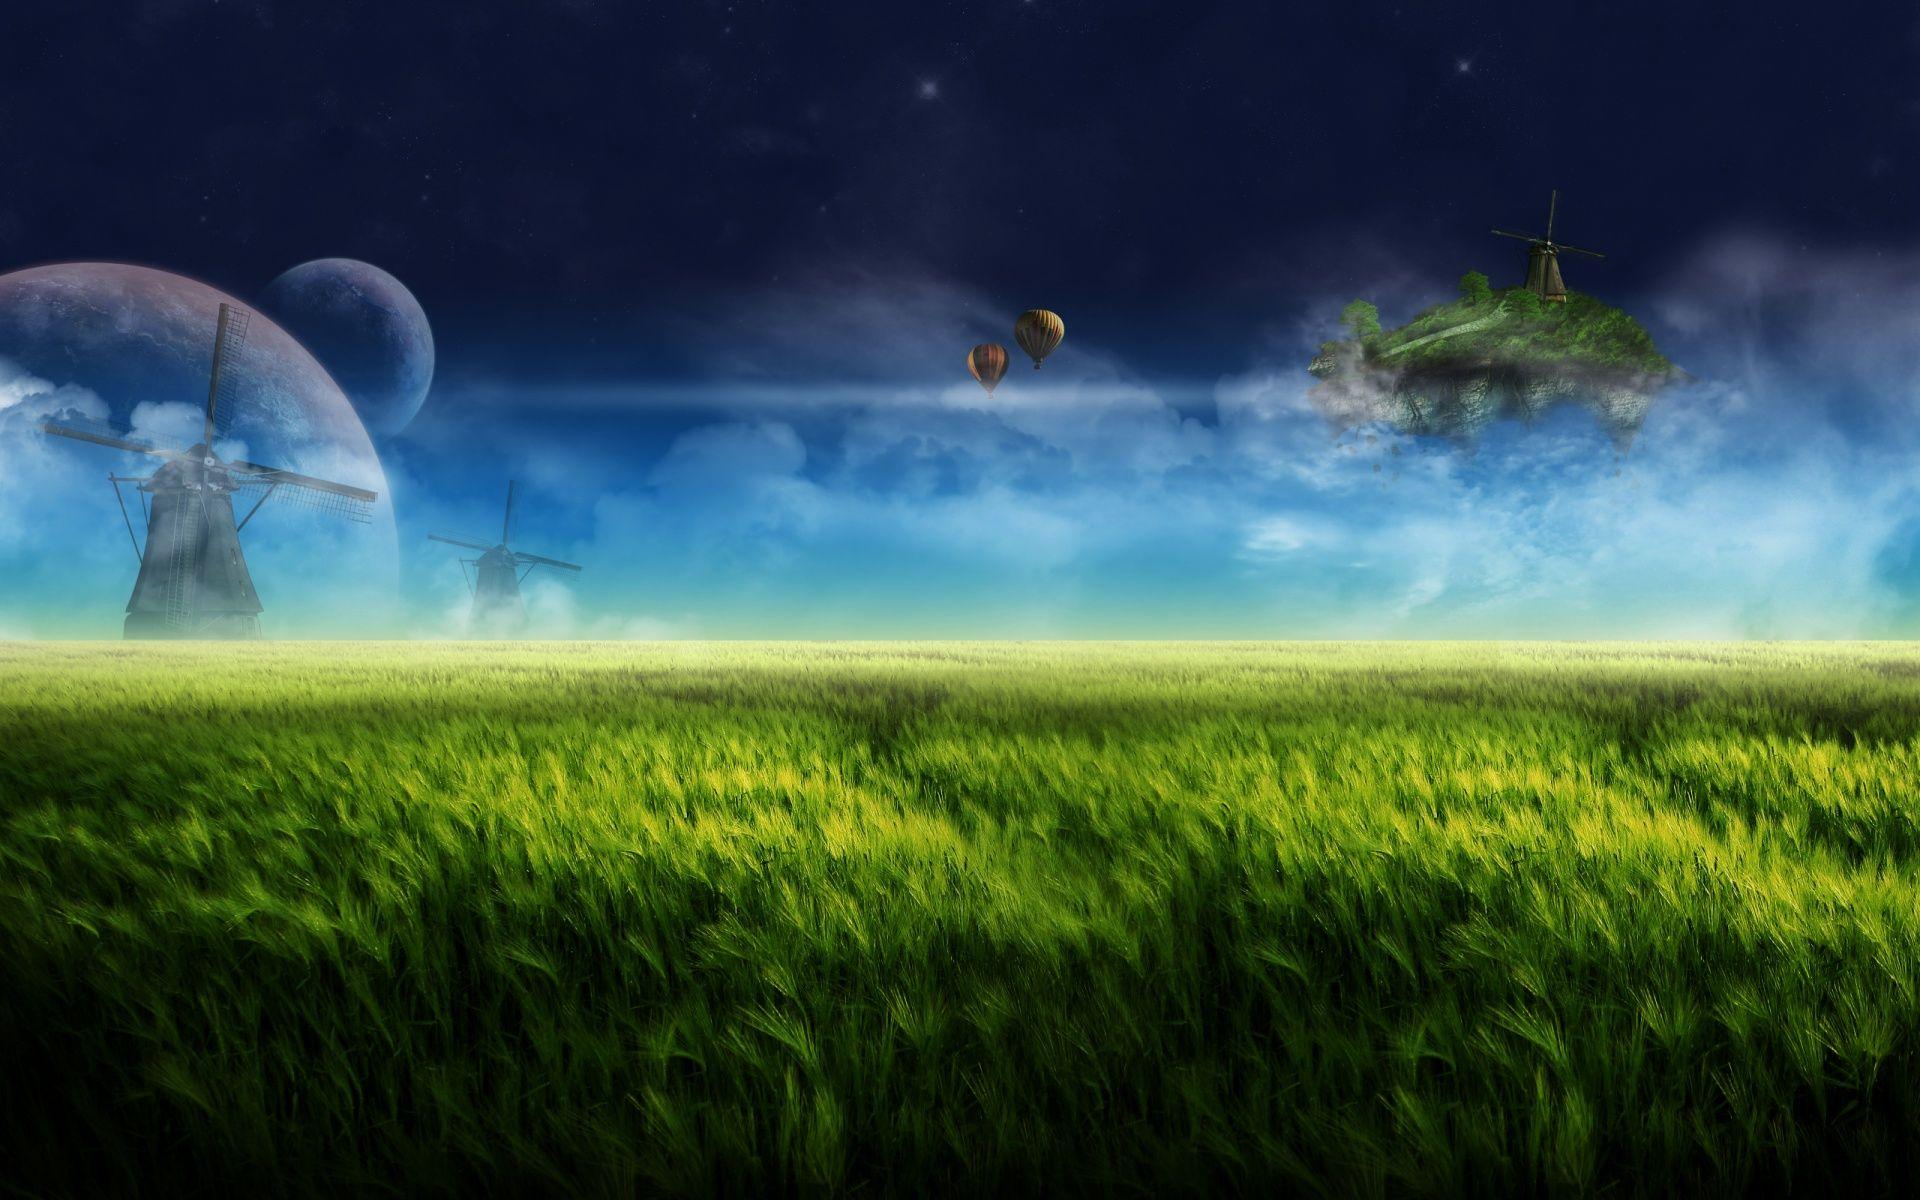 fantasy landscapes nature artistic fields hot air balloons